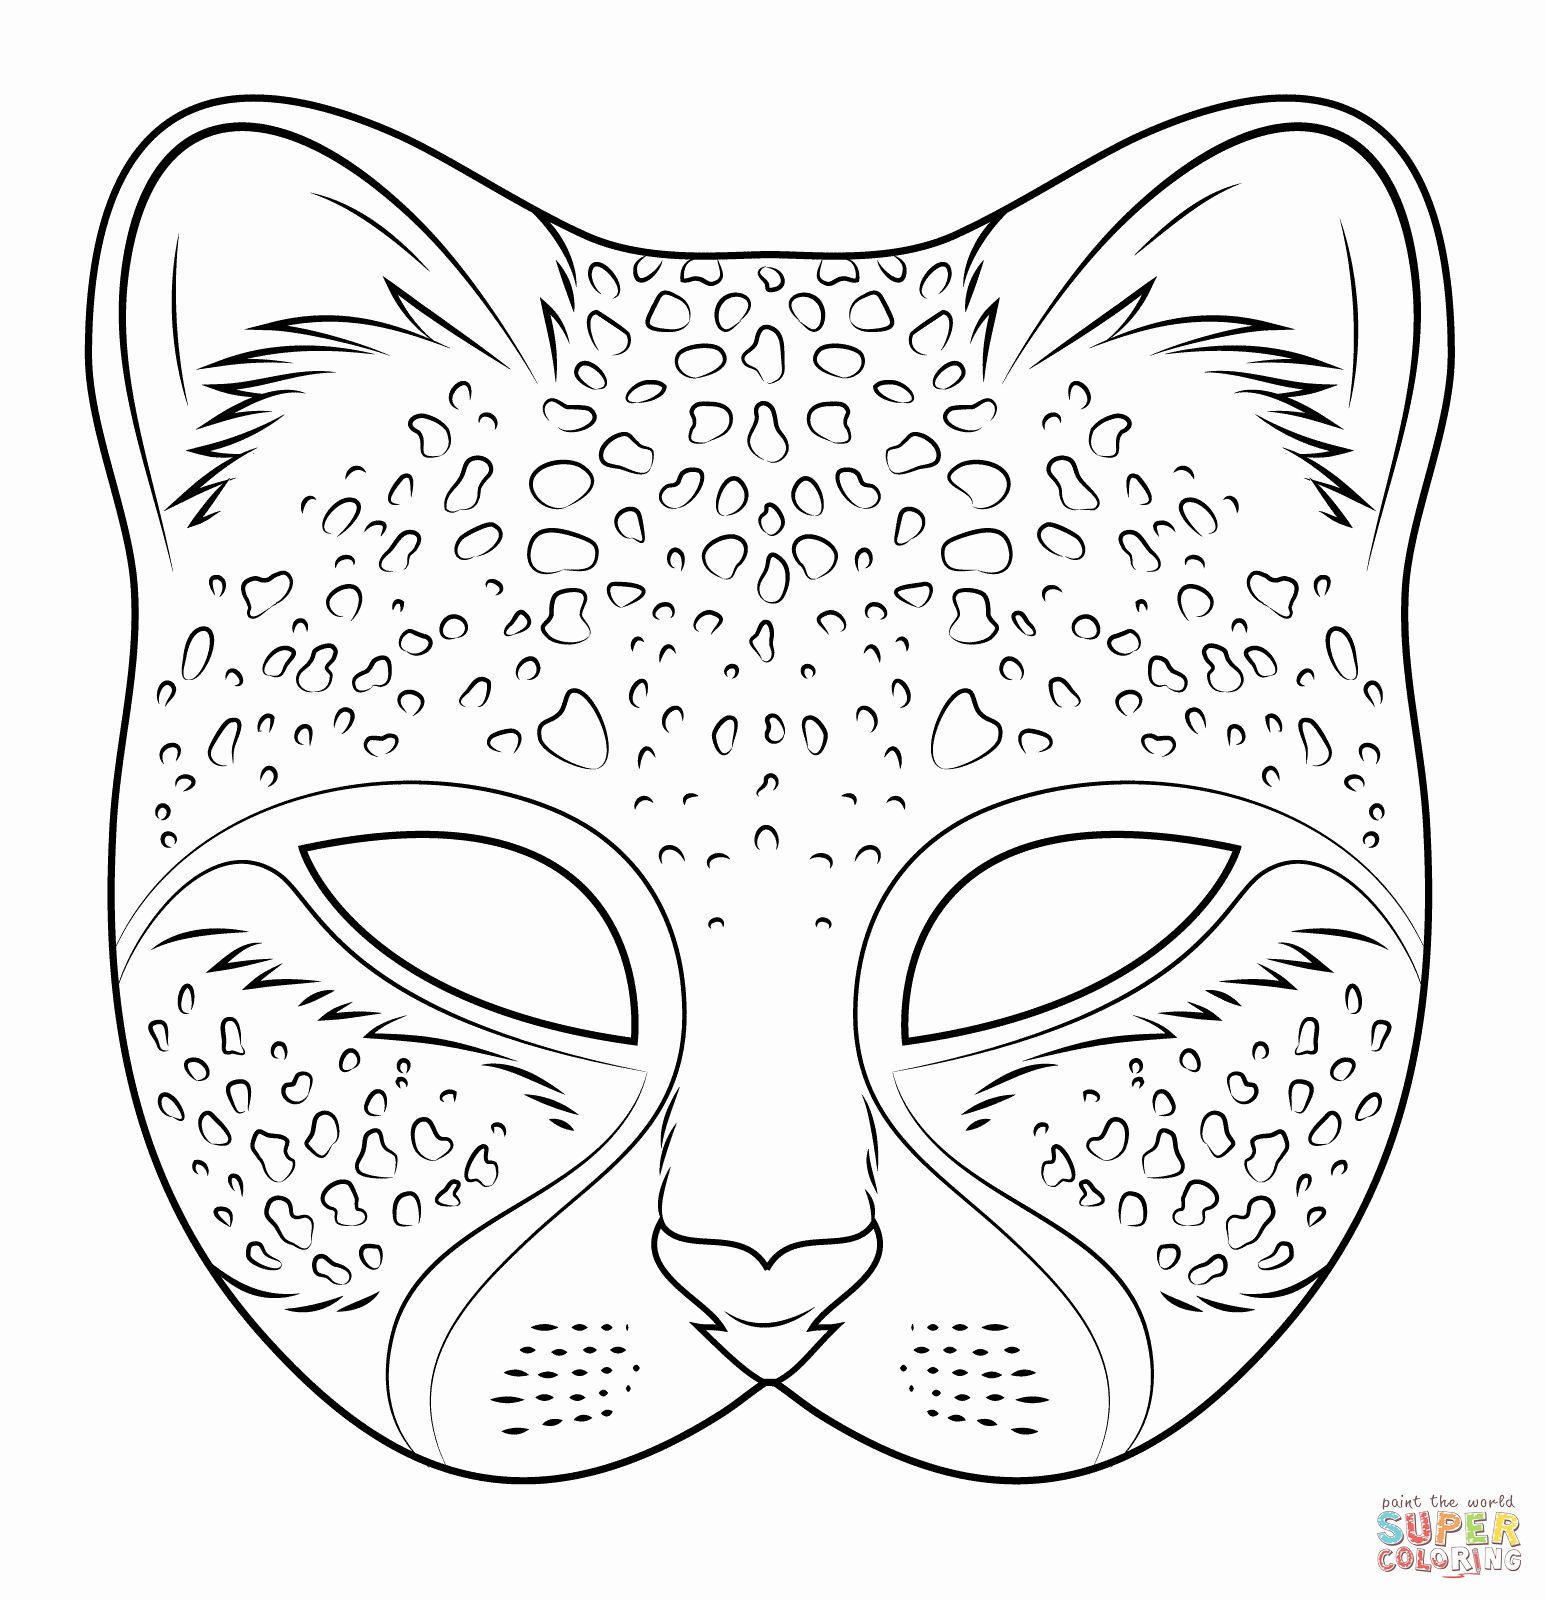 Cheetah Coloring Pages Lovely Cheetah Mask Coloring Page | Coloring mask,  Printable animal masks, Mask template